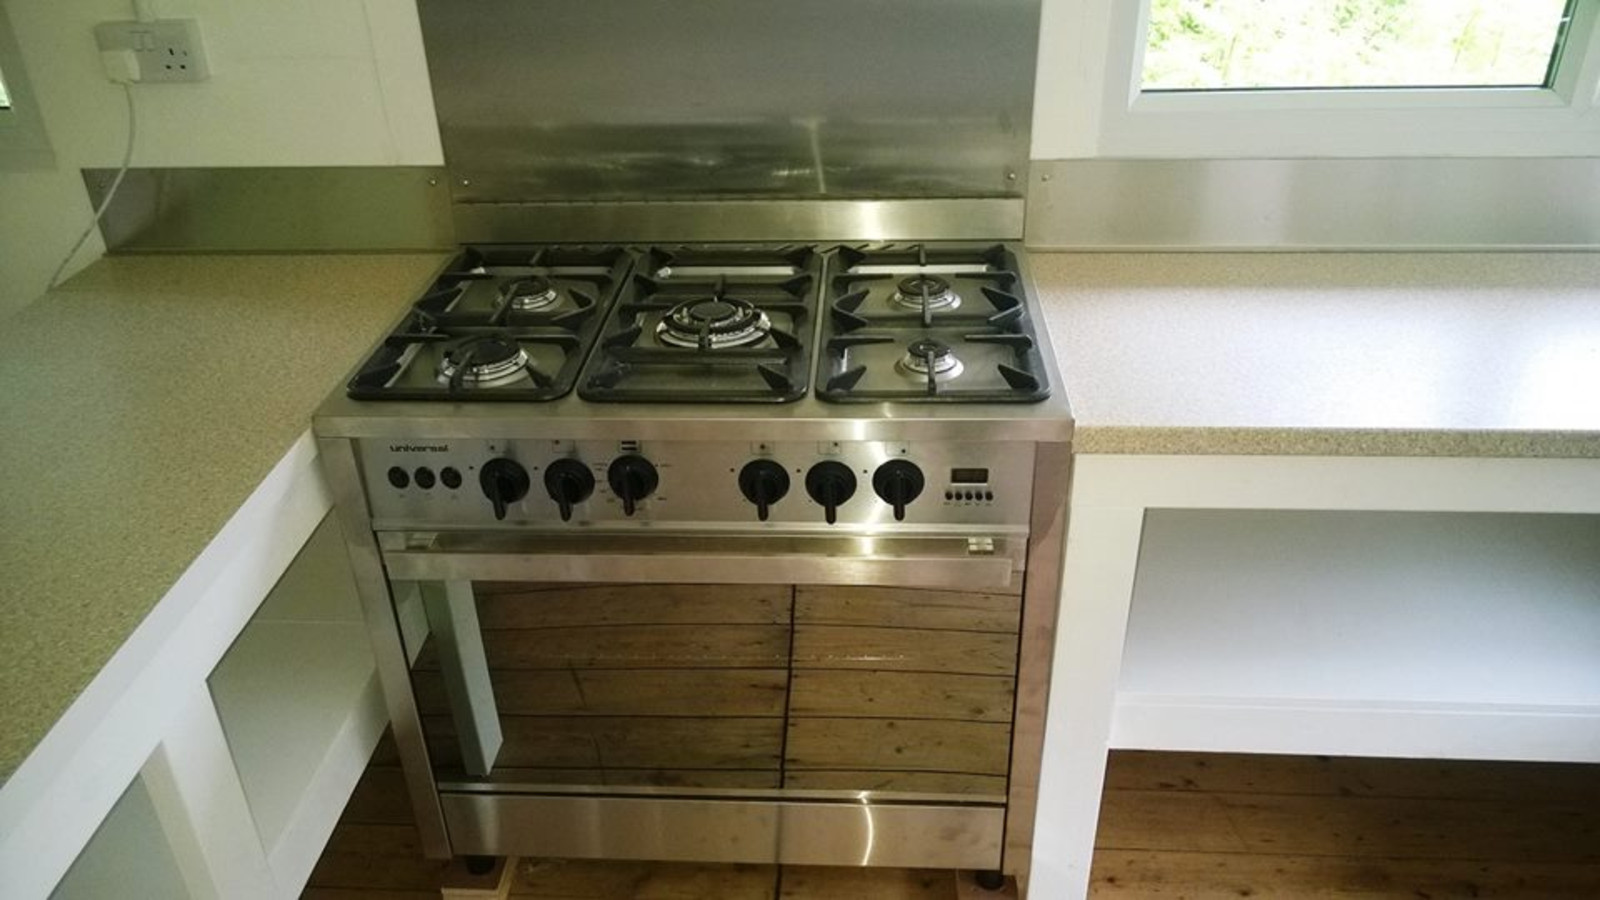 a sparkling new cooker!